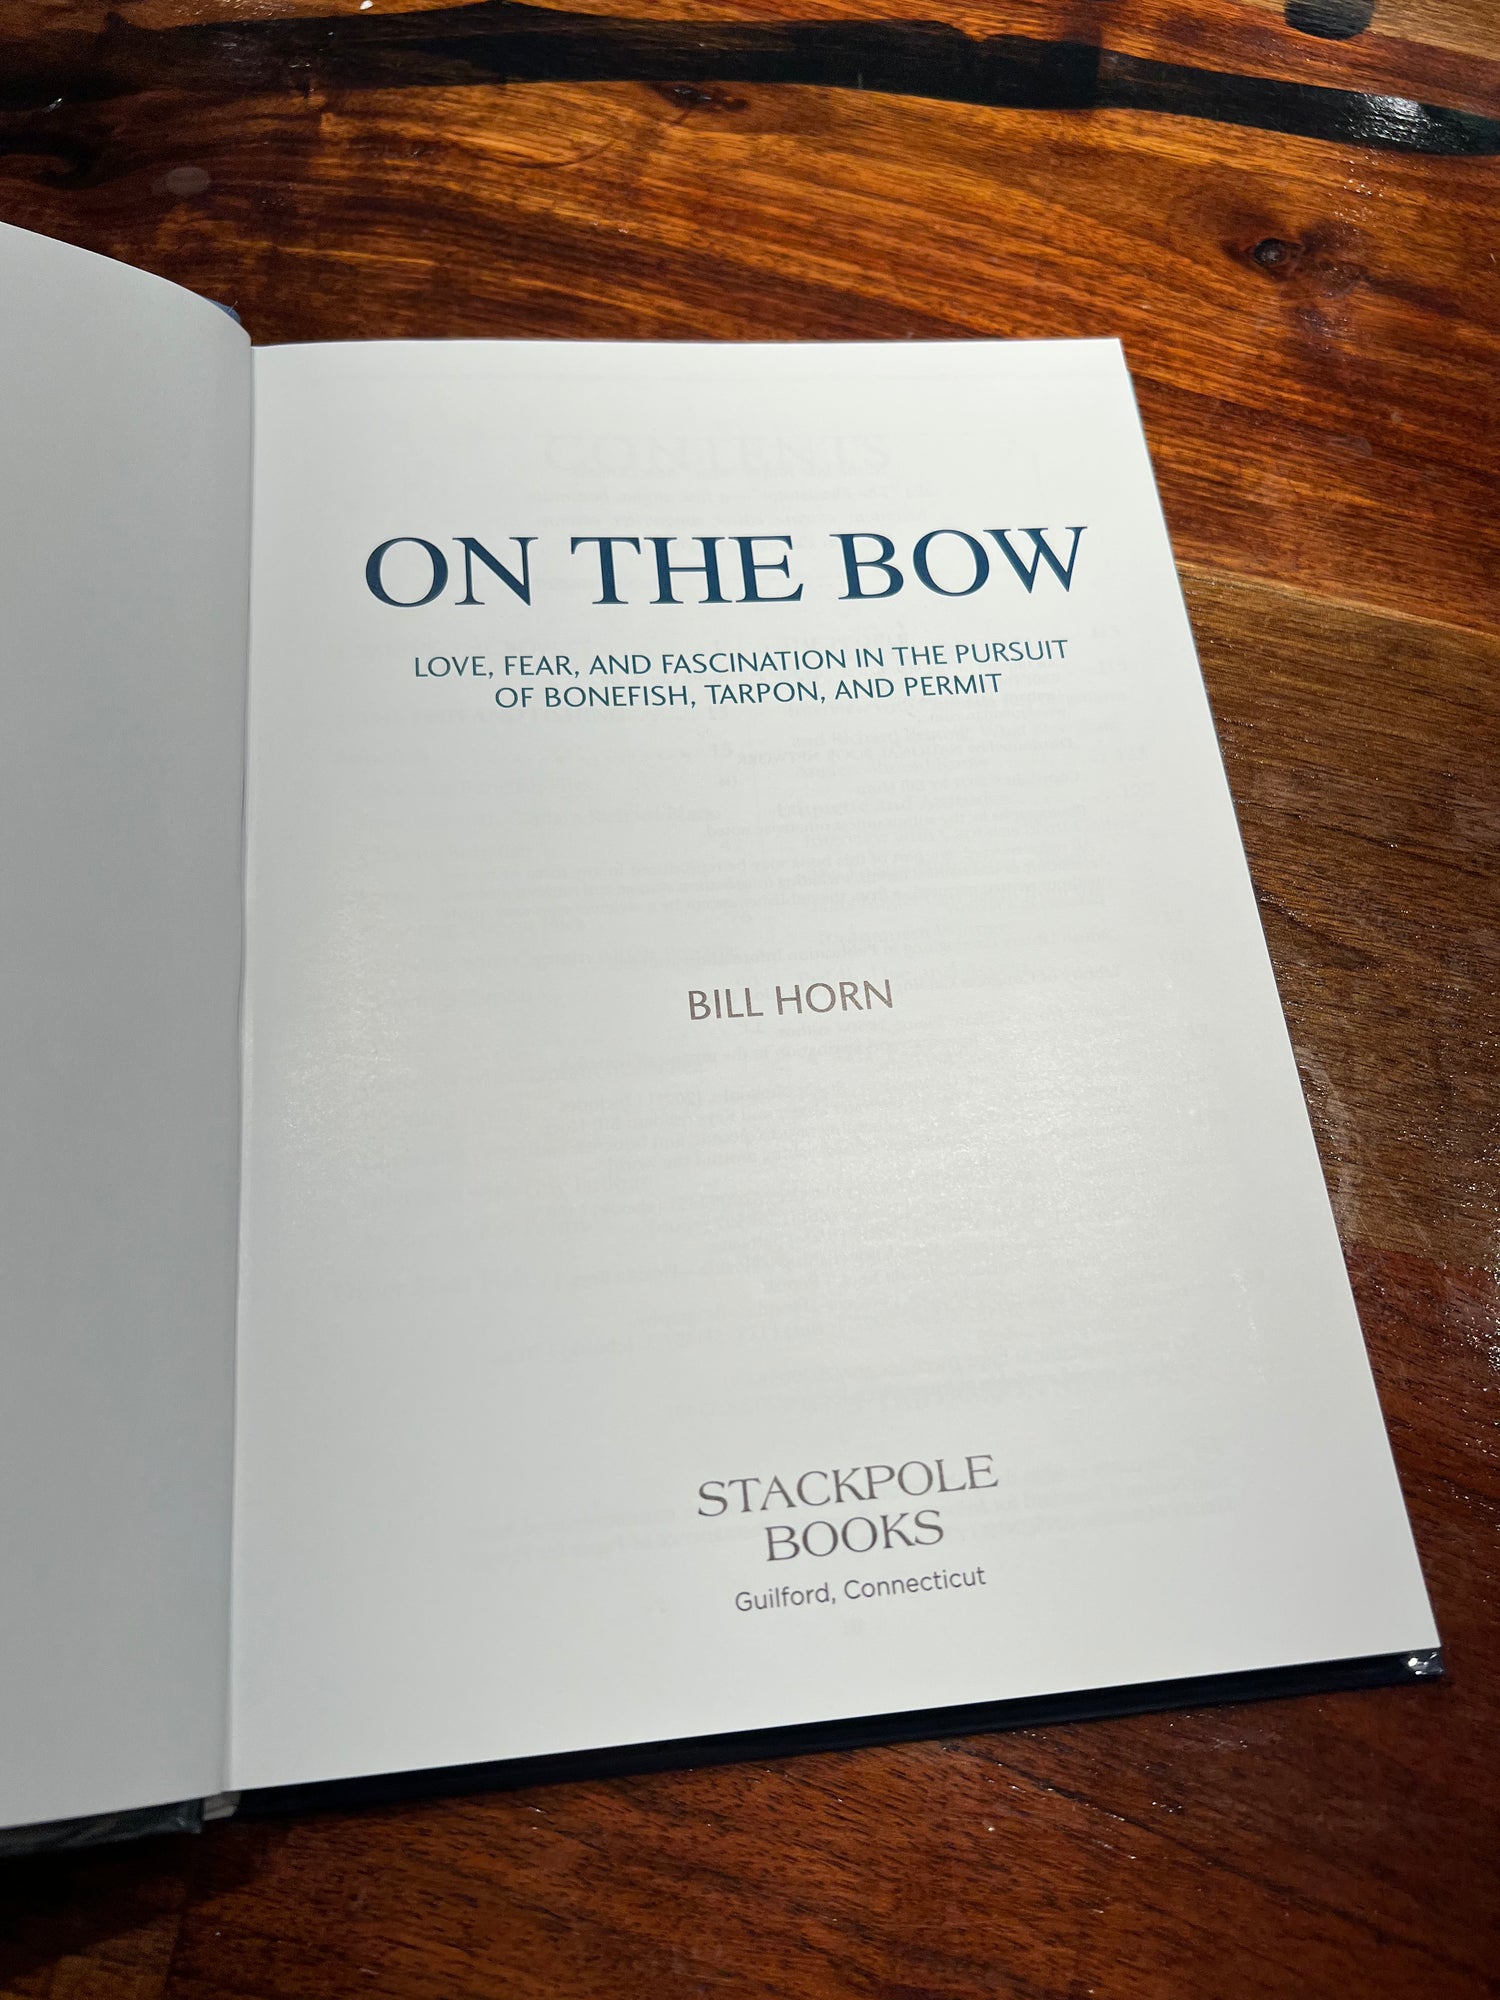 On the Bow by Bill Horn